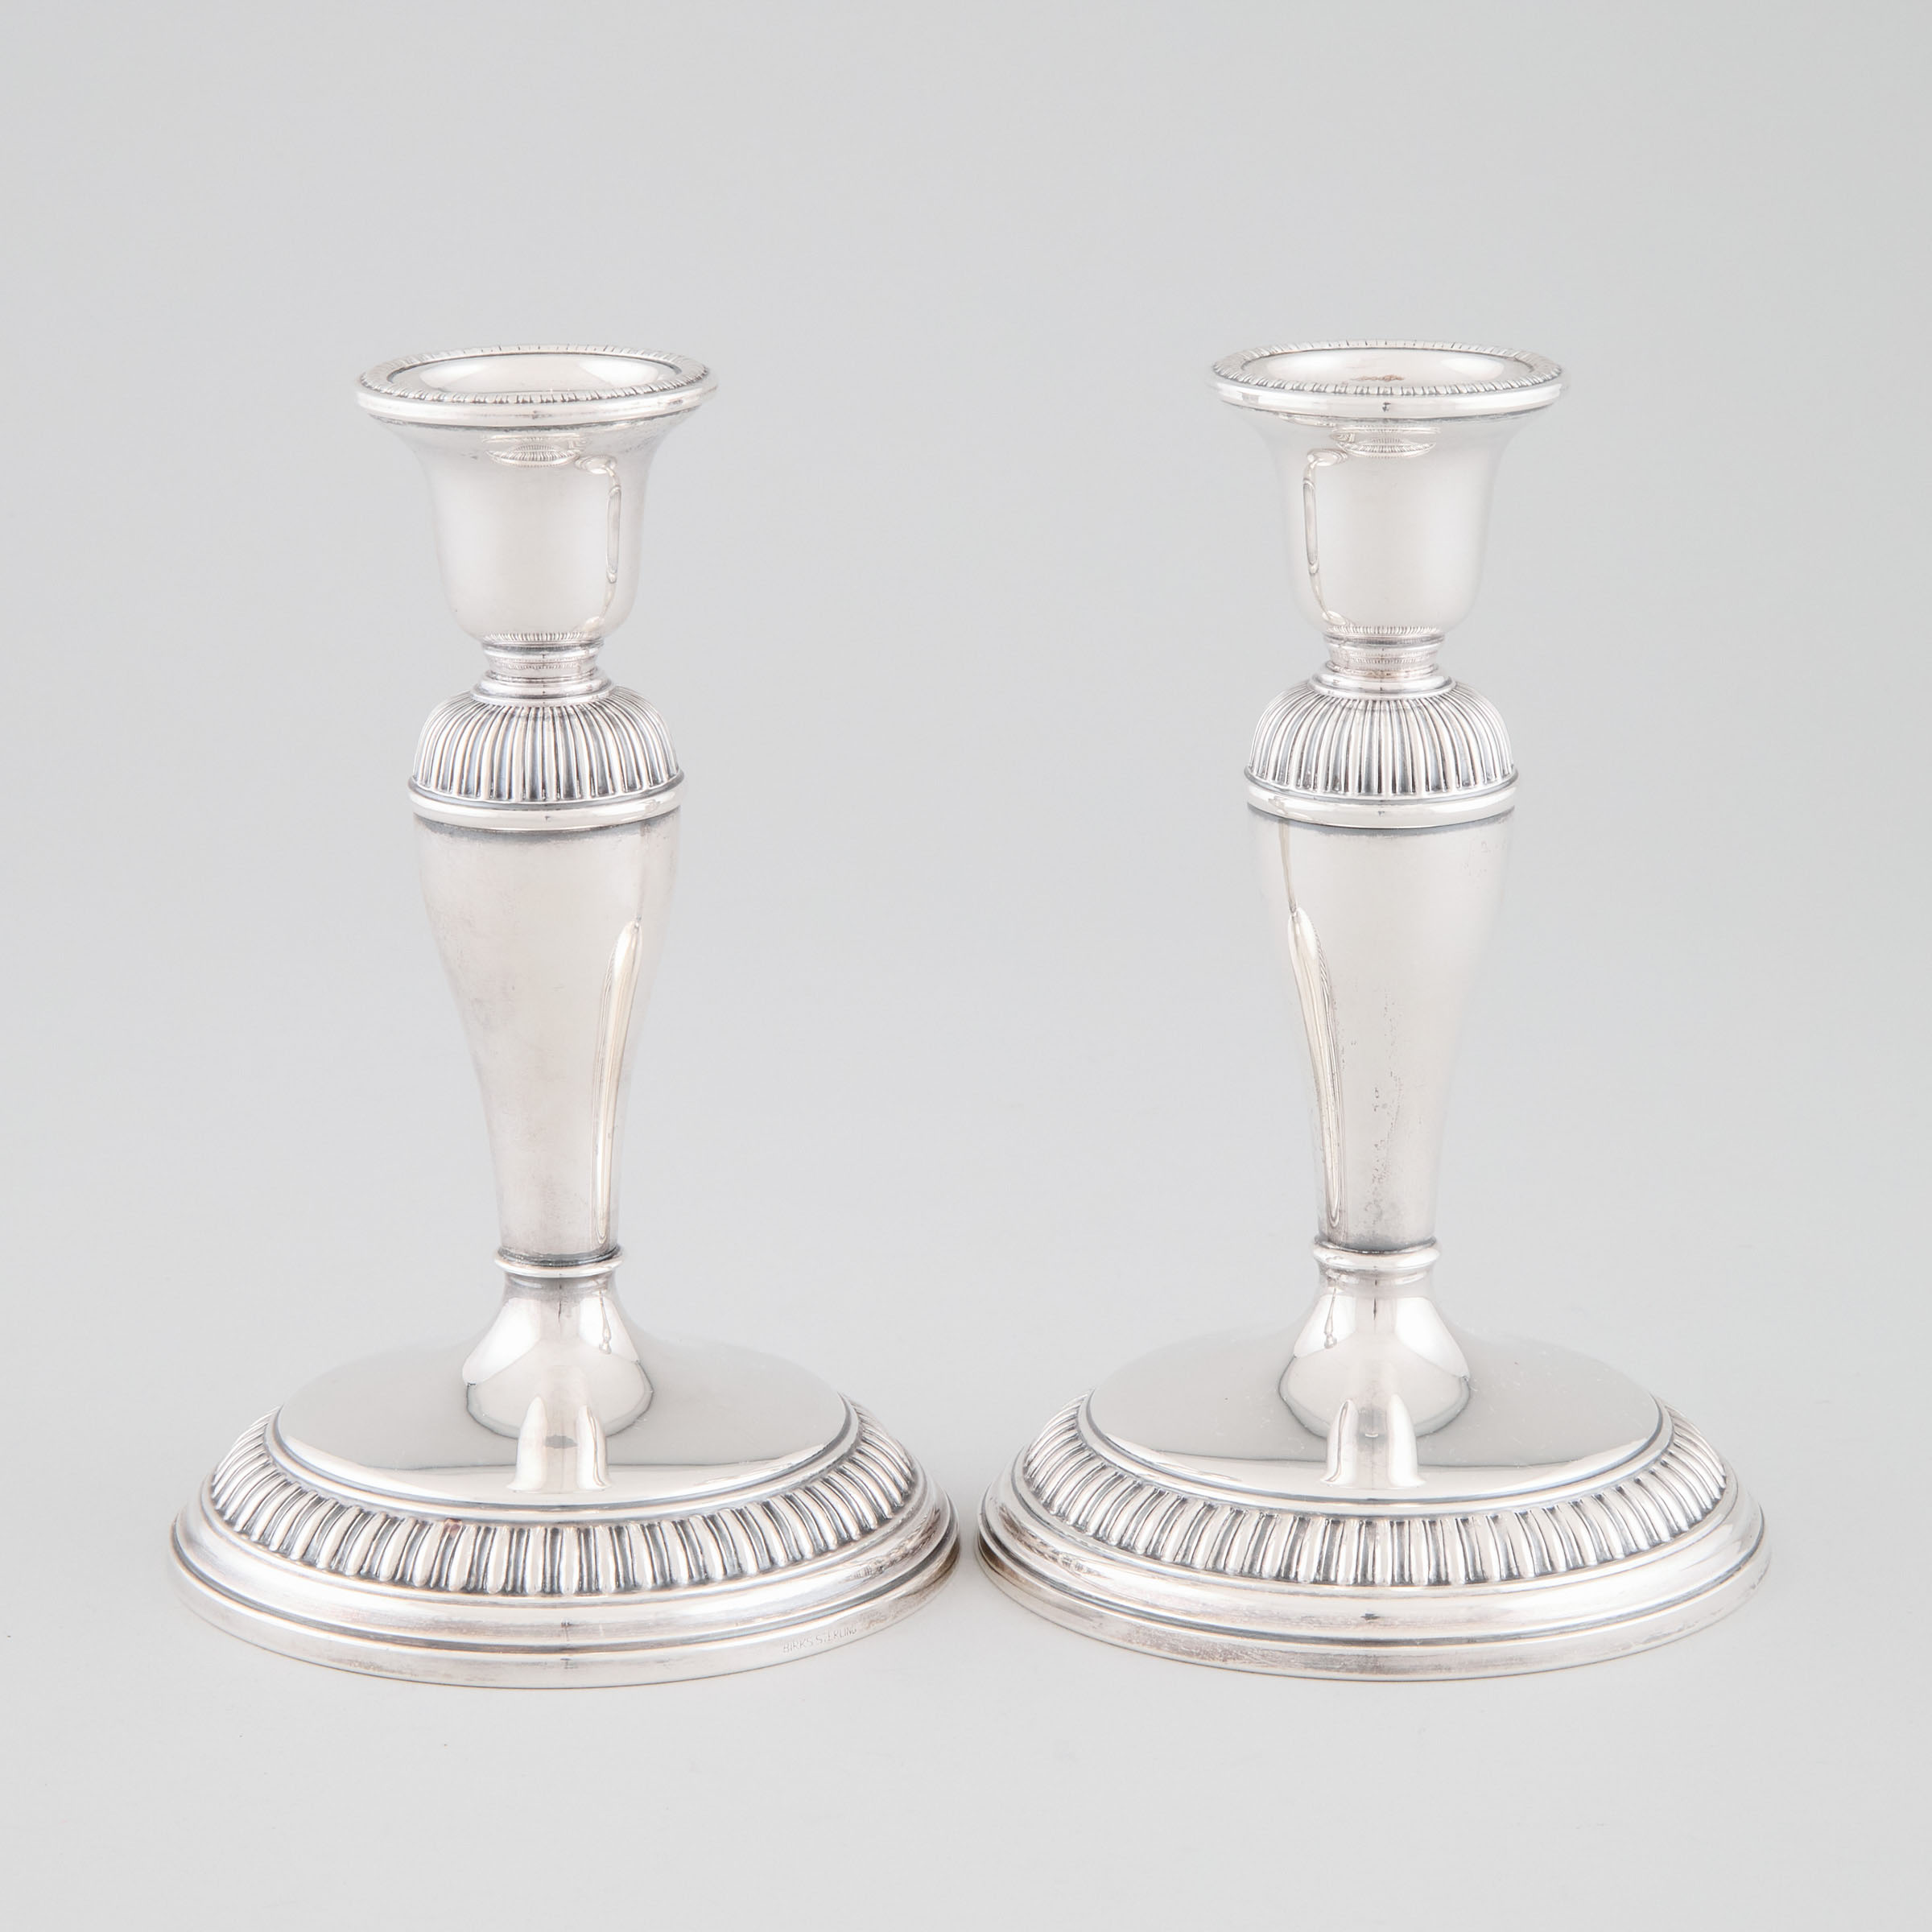 Pair of Canadian Silver Table Candlesticks  3c9788